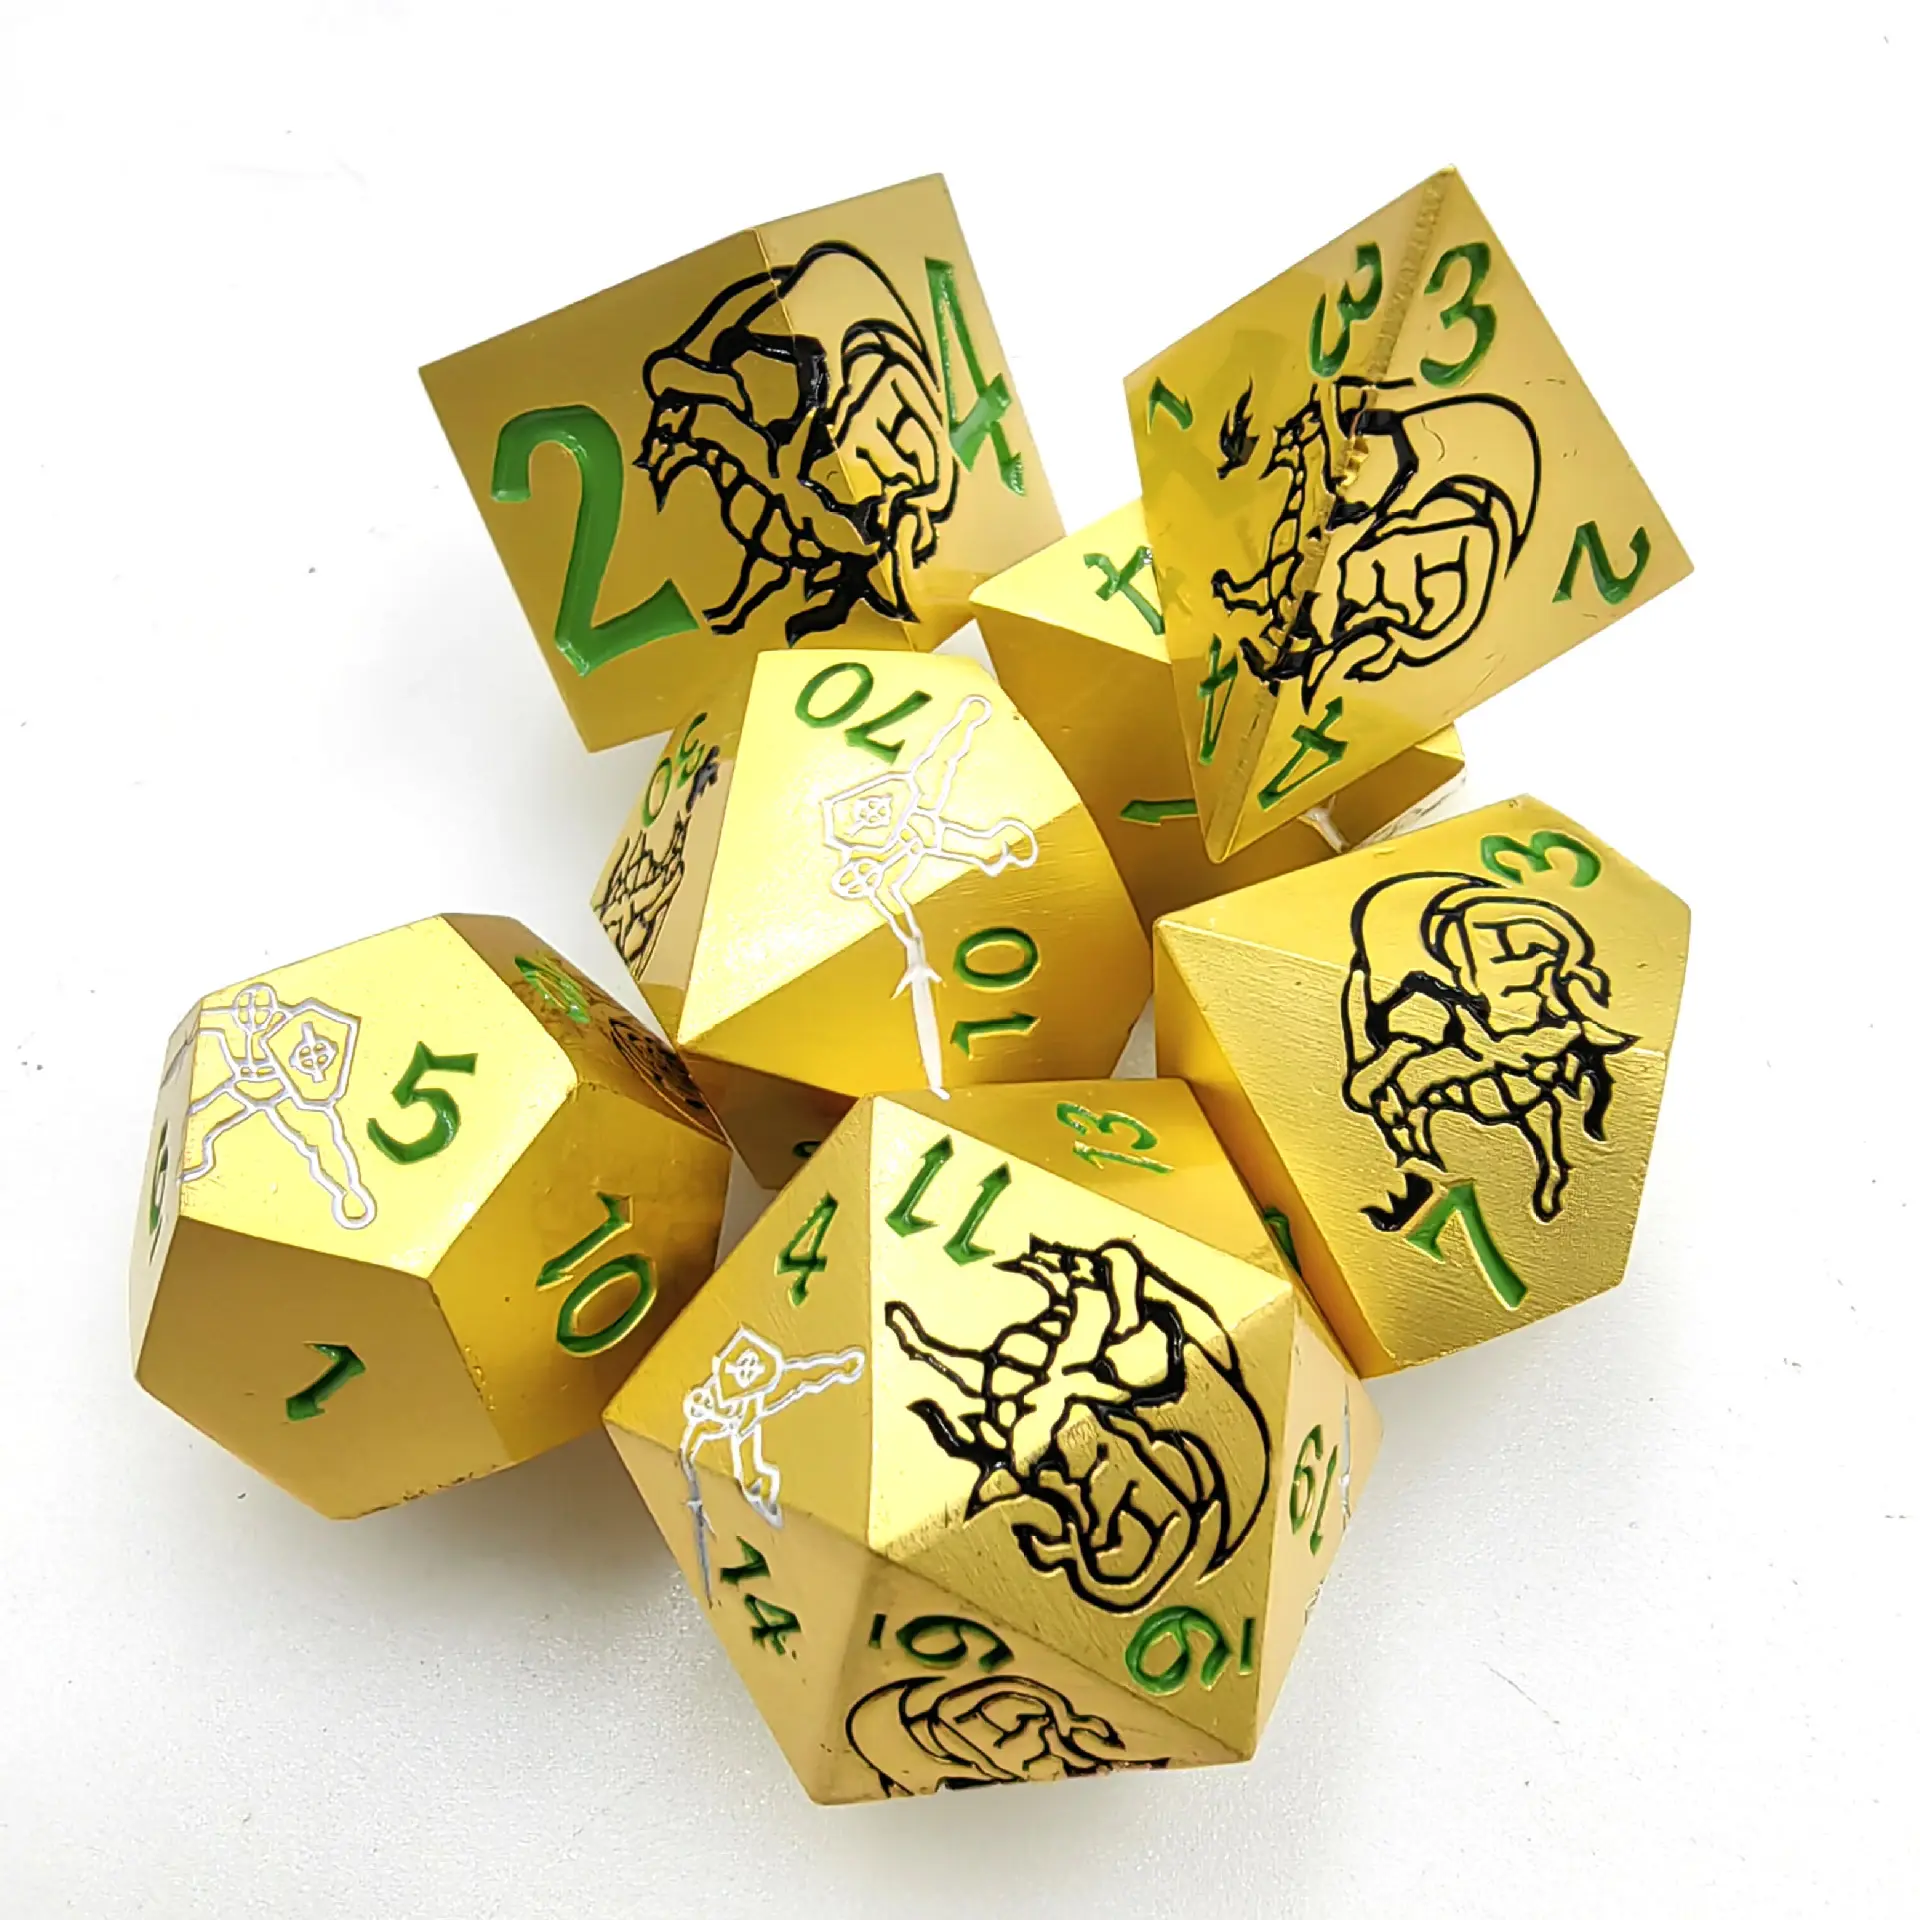 Best Selling Creative Personality Solid Cool Metal Dice for Table Top Game 7Pcs Set sharp cthulhu dice Metal Polyhedral Dice Set